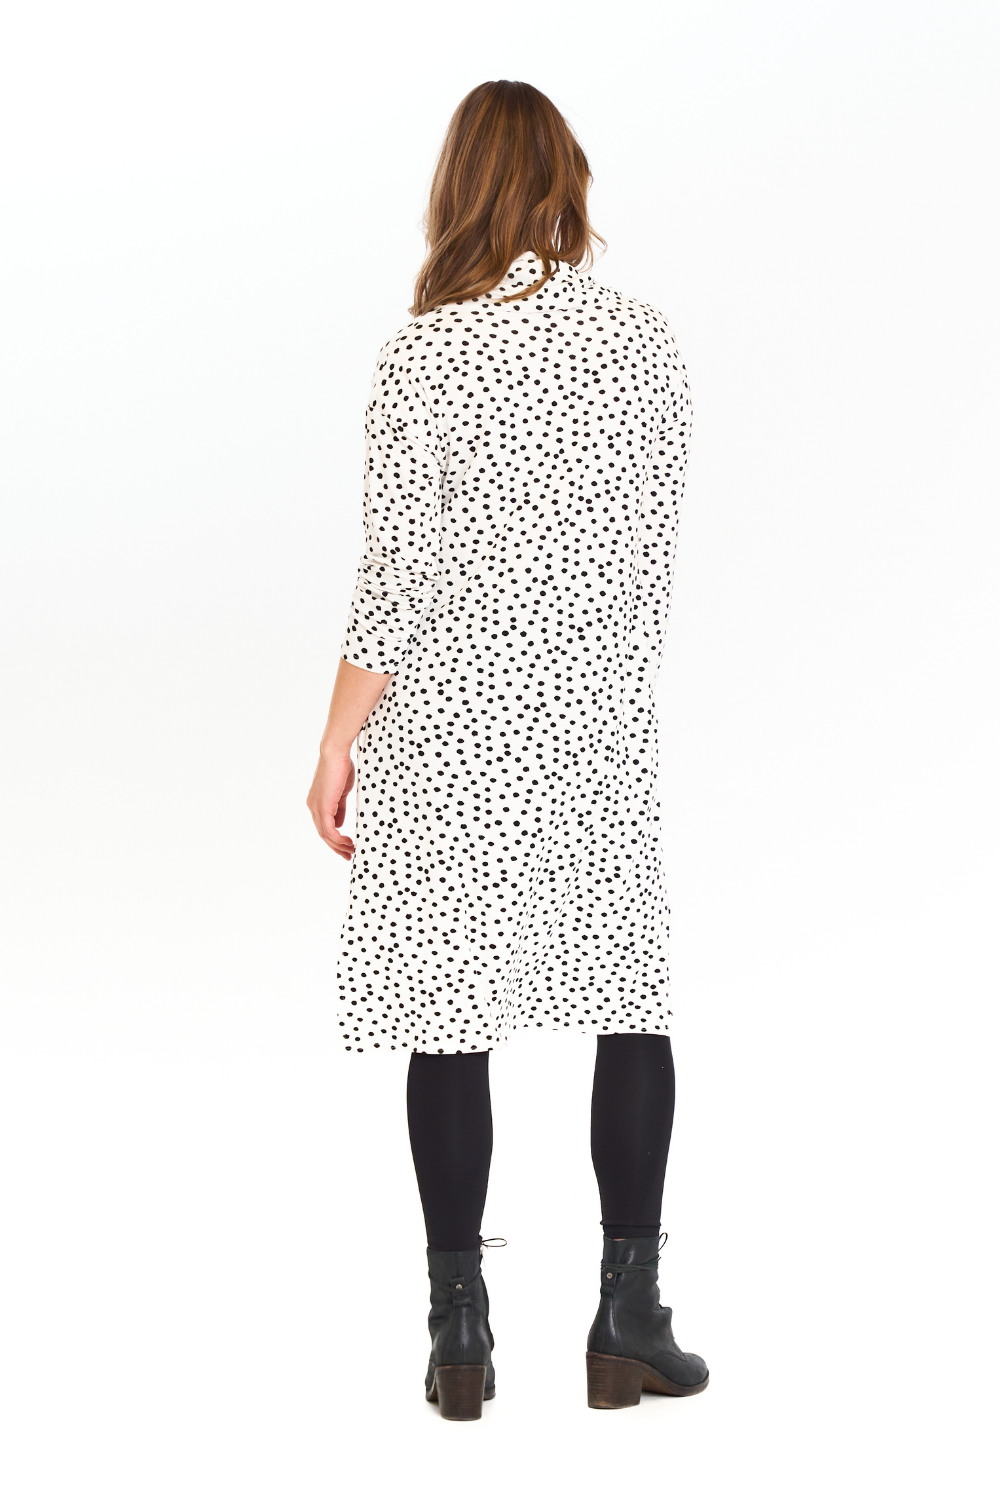 Mimi Midi Dress by EMK, Black and White, back view, polka dots, cowl neck, long sleeves, midi-length, side slits, side pockets, eco-fabric, bamboo rayon, cotton, sizes S-XL, made in Winnipeg